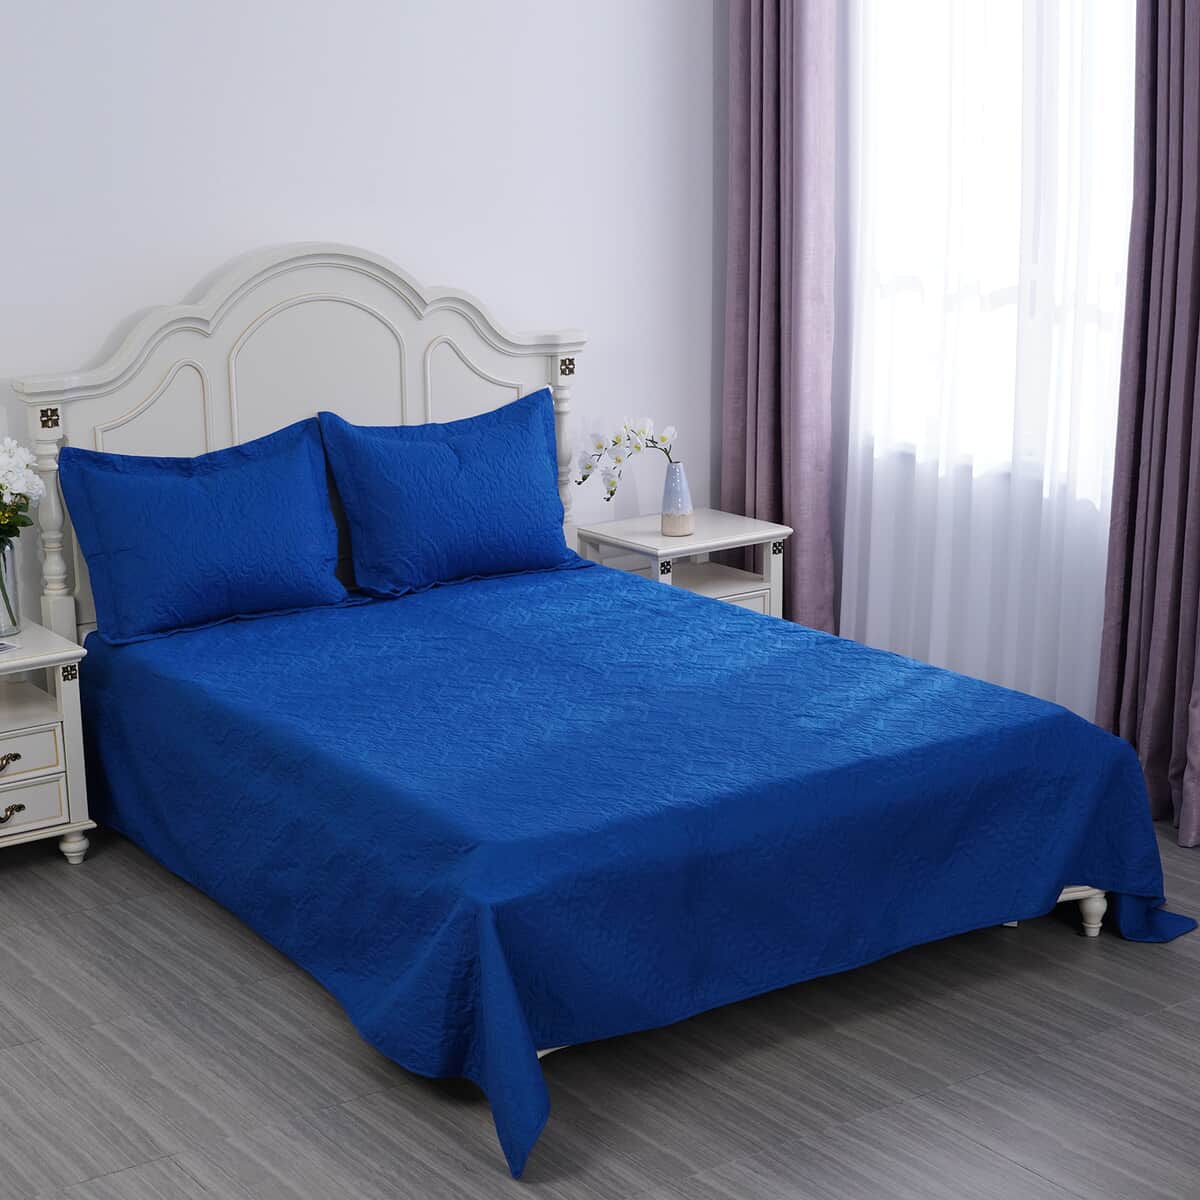 Homesmart 3 Pcs Solid Blue Pinsonic Quilt Bedding Set - Queen Size image number 0